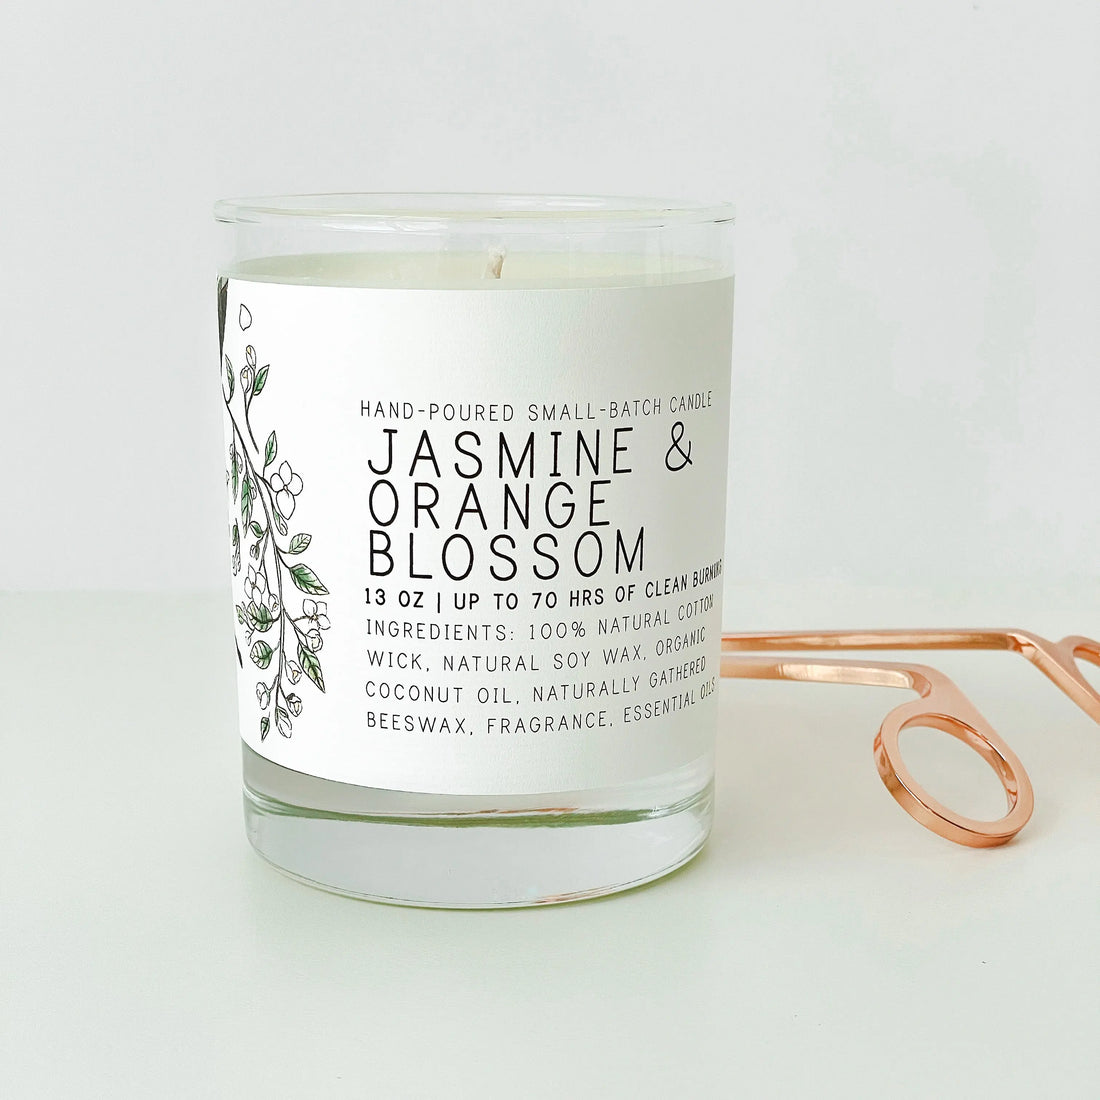 Introducing our newest candle scent:  Jasmine and Orange Blossom